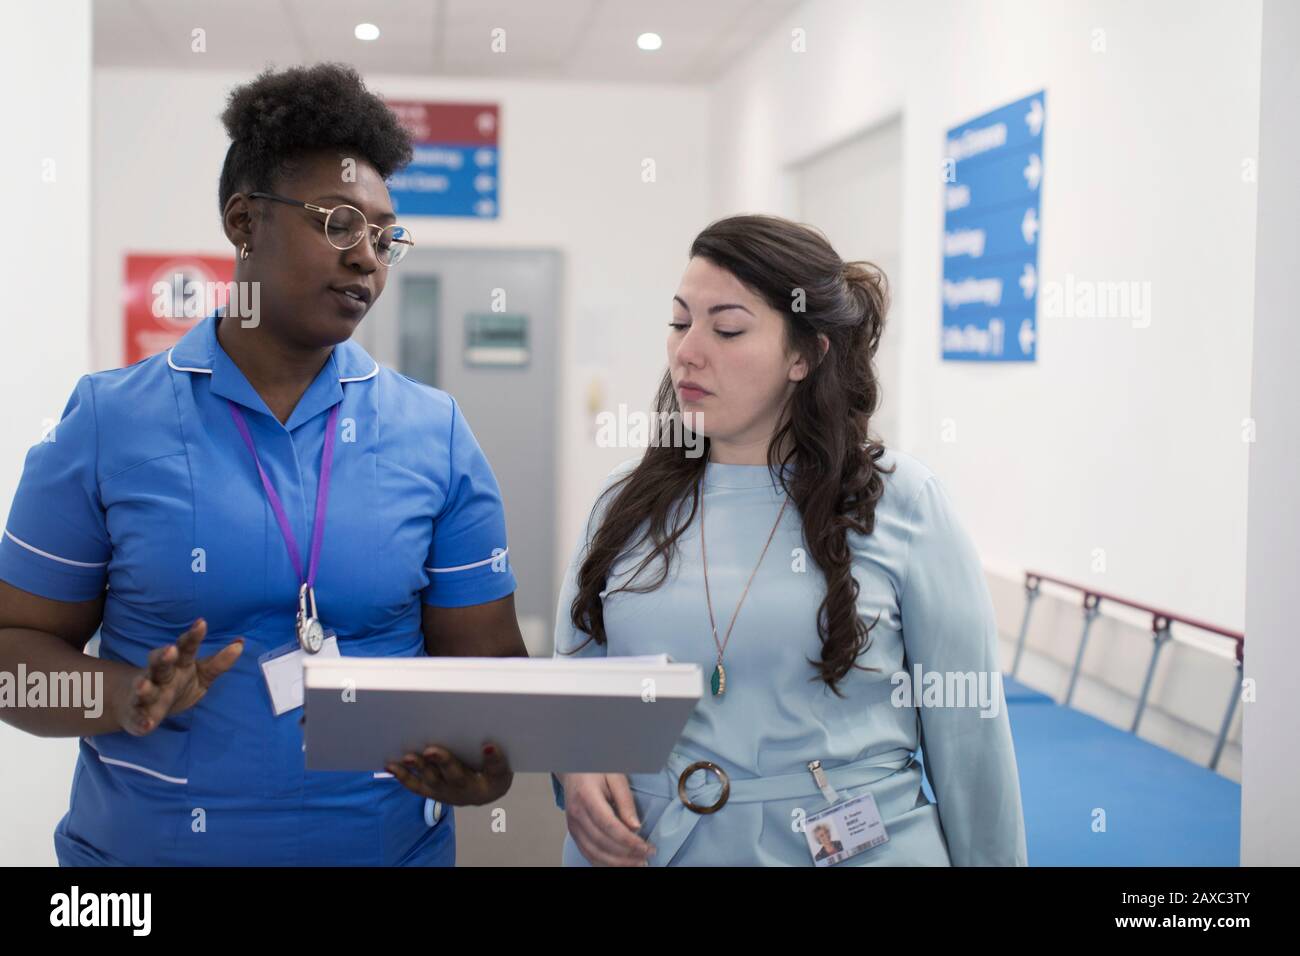 Female doctor and nurse making rounds, discussing medical chart in hospital corridor Stock Photo